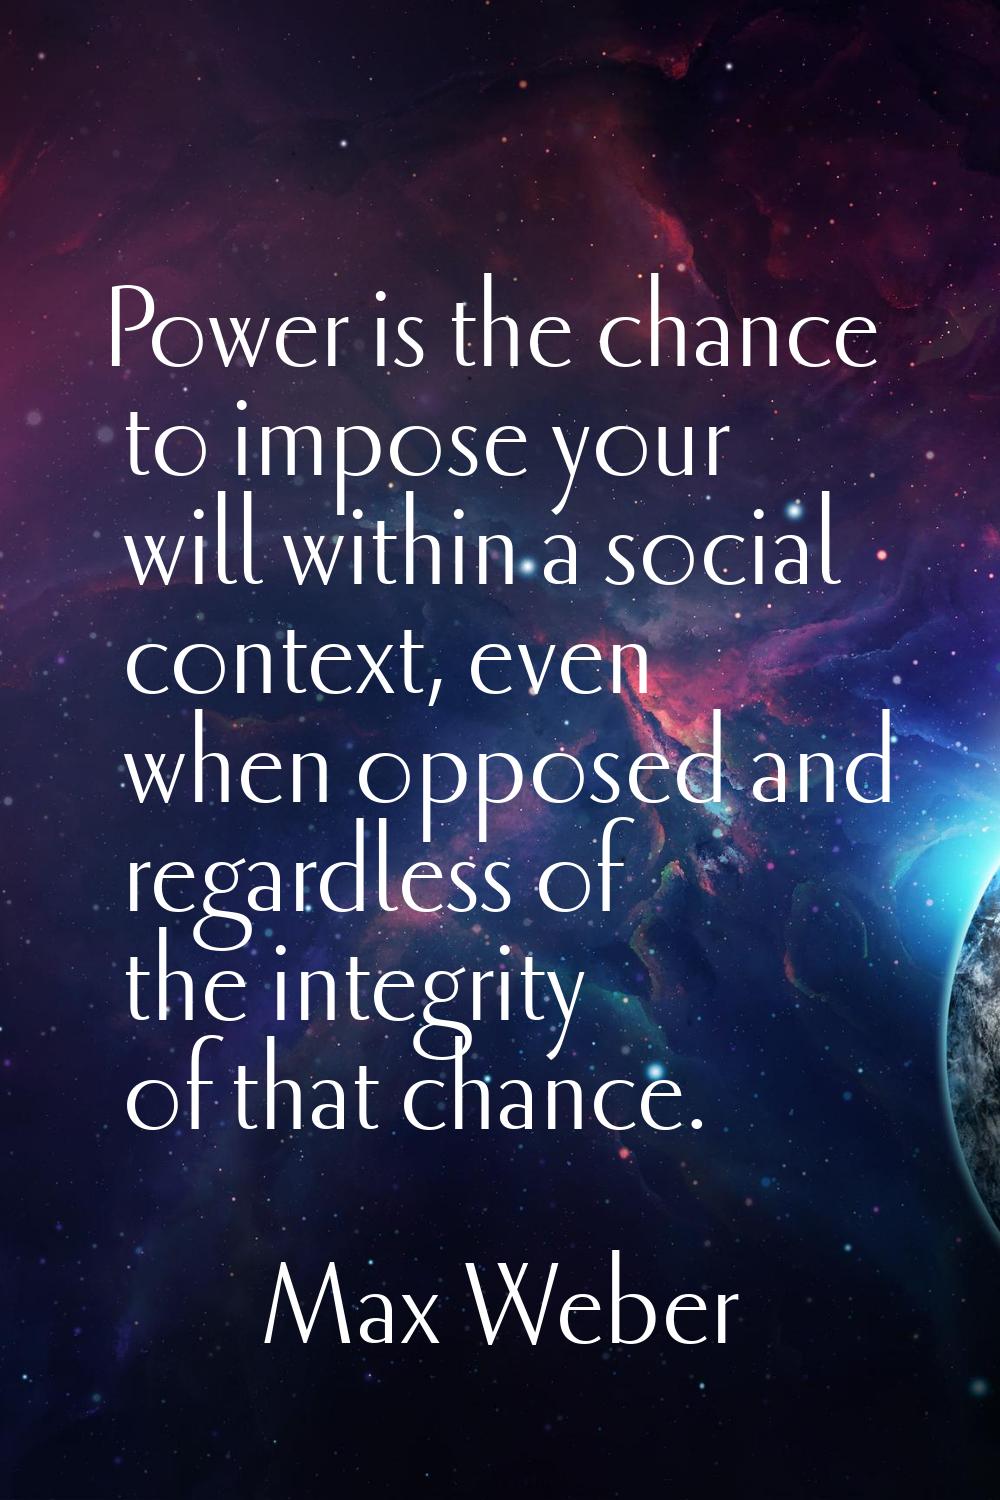 Power is the chance to impose your will within a social context, even when opposed and regardless o